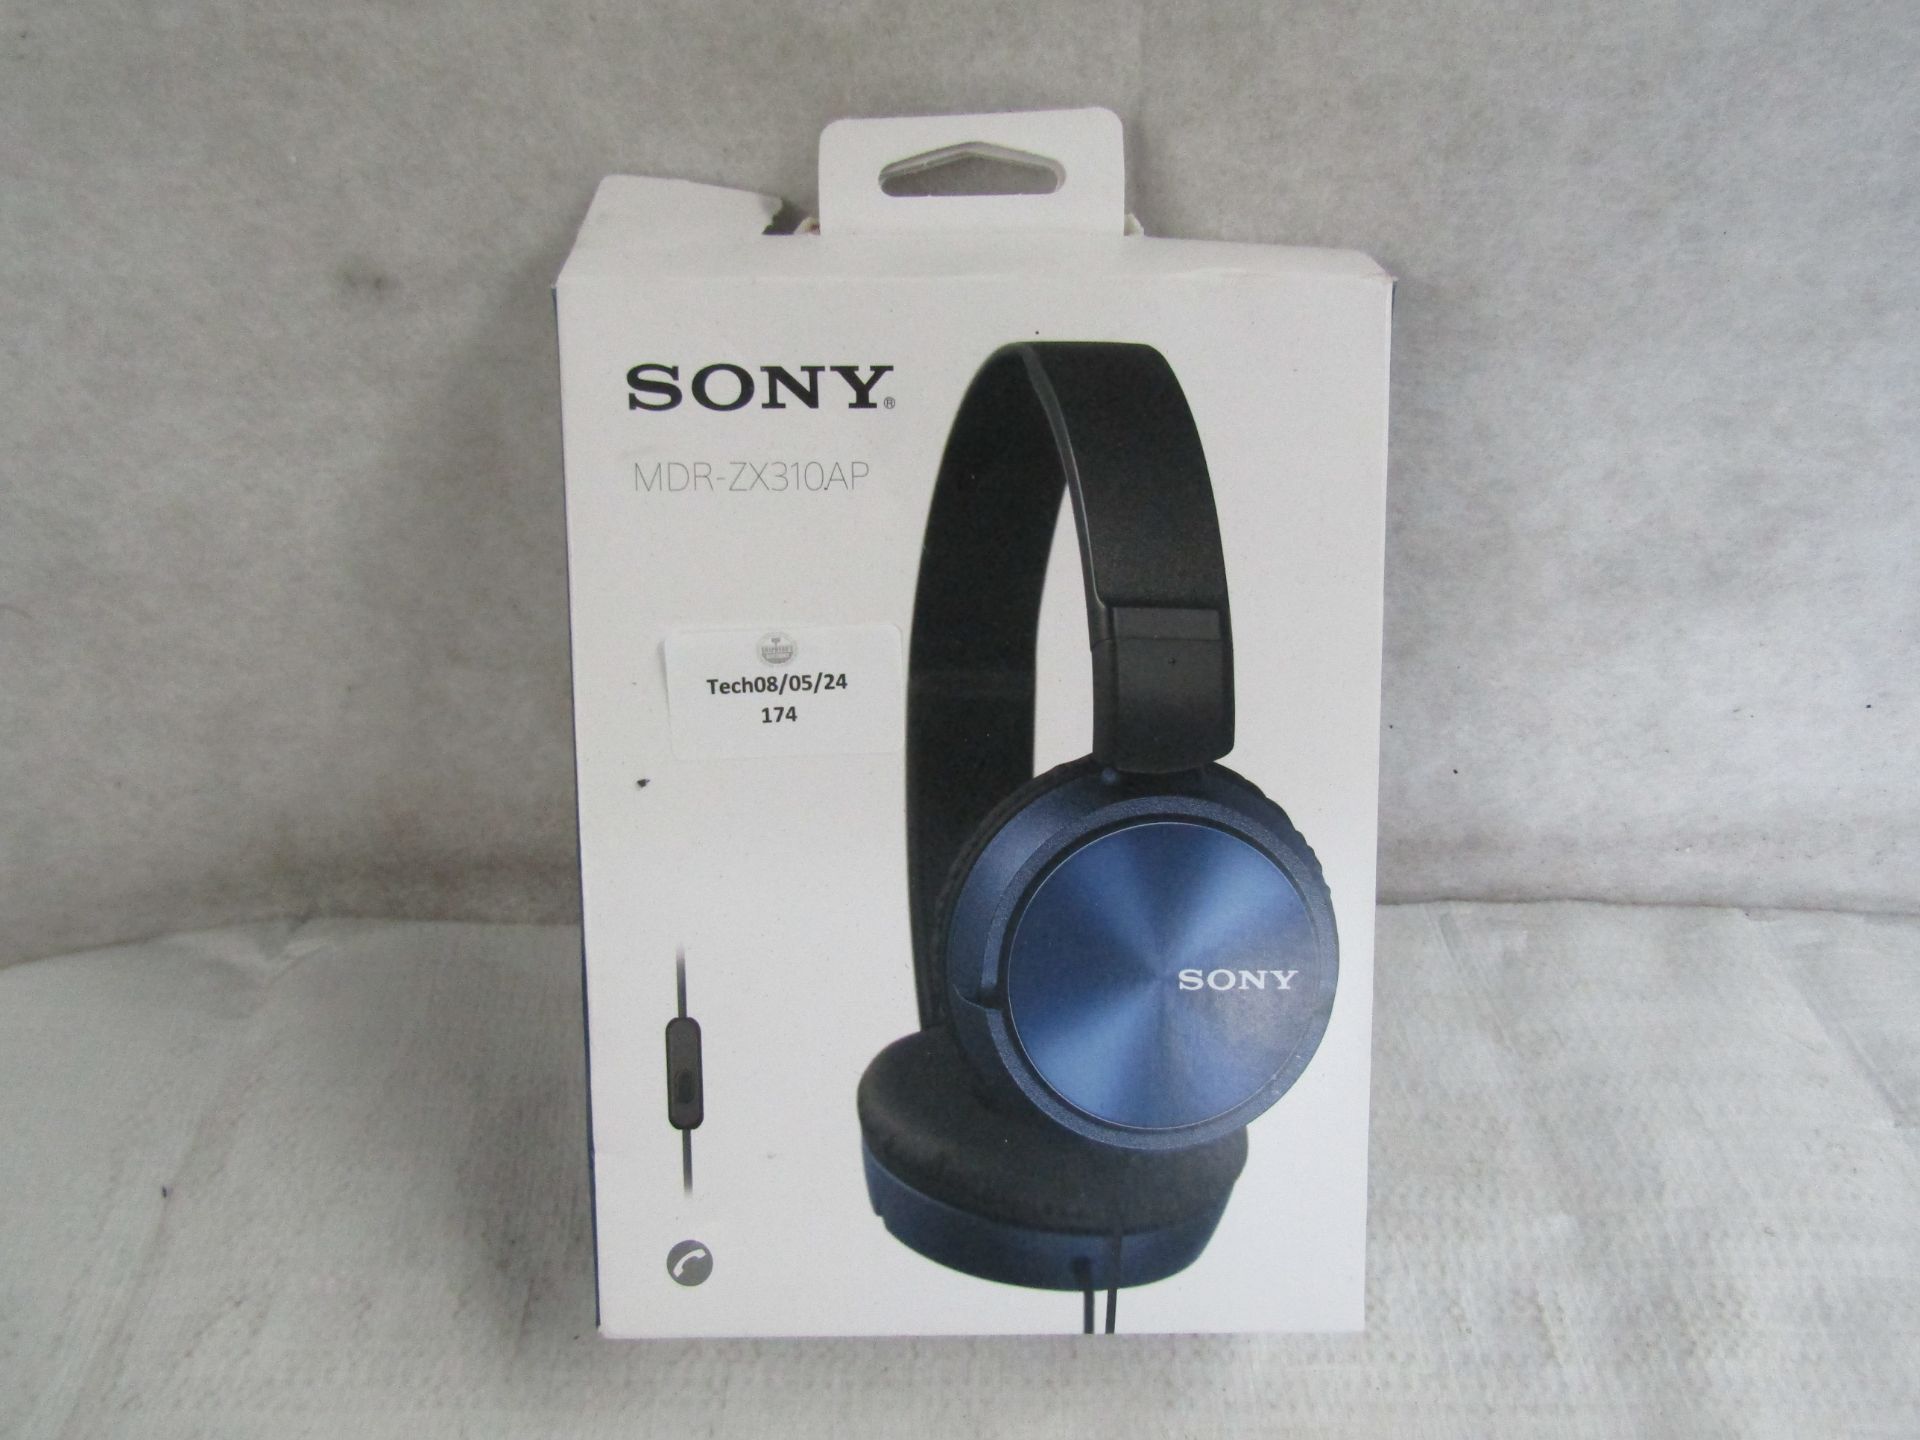 Sony Wired Overhead Headphones, MDR-ZX310AP - Unchecked & Boxed.